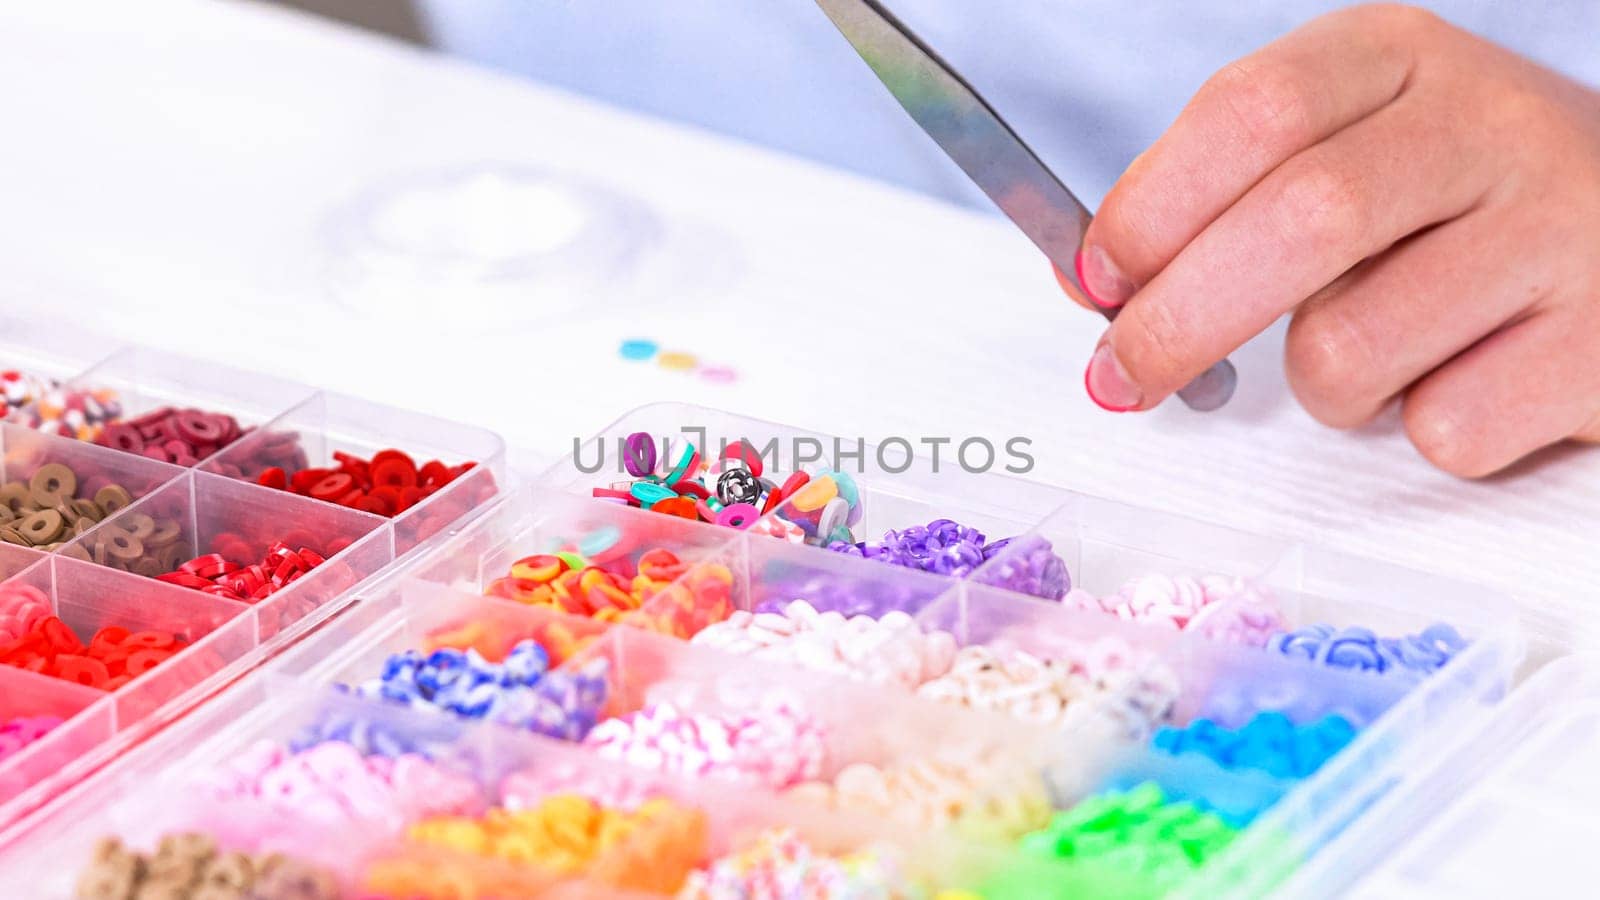 Delicate fingers of a young girl navigate through a treasure trove of bright, multicolored beads, each compartment revealing a new hue to choose from. She's immersed in the joyful task of stringing together a handmade bracelet, with golden beads and pearls lying nearby to add a touch of sparkle to her creation.